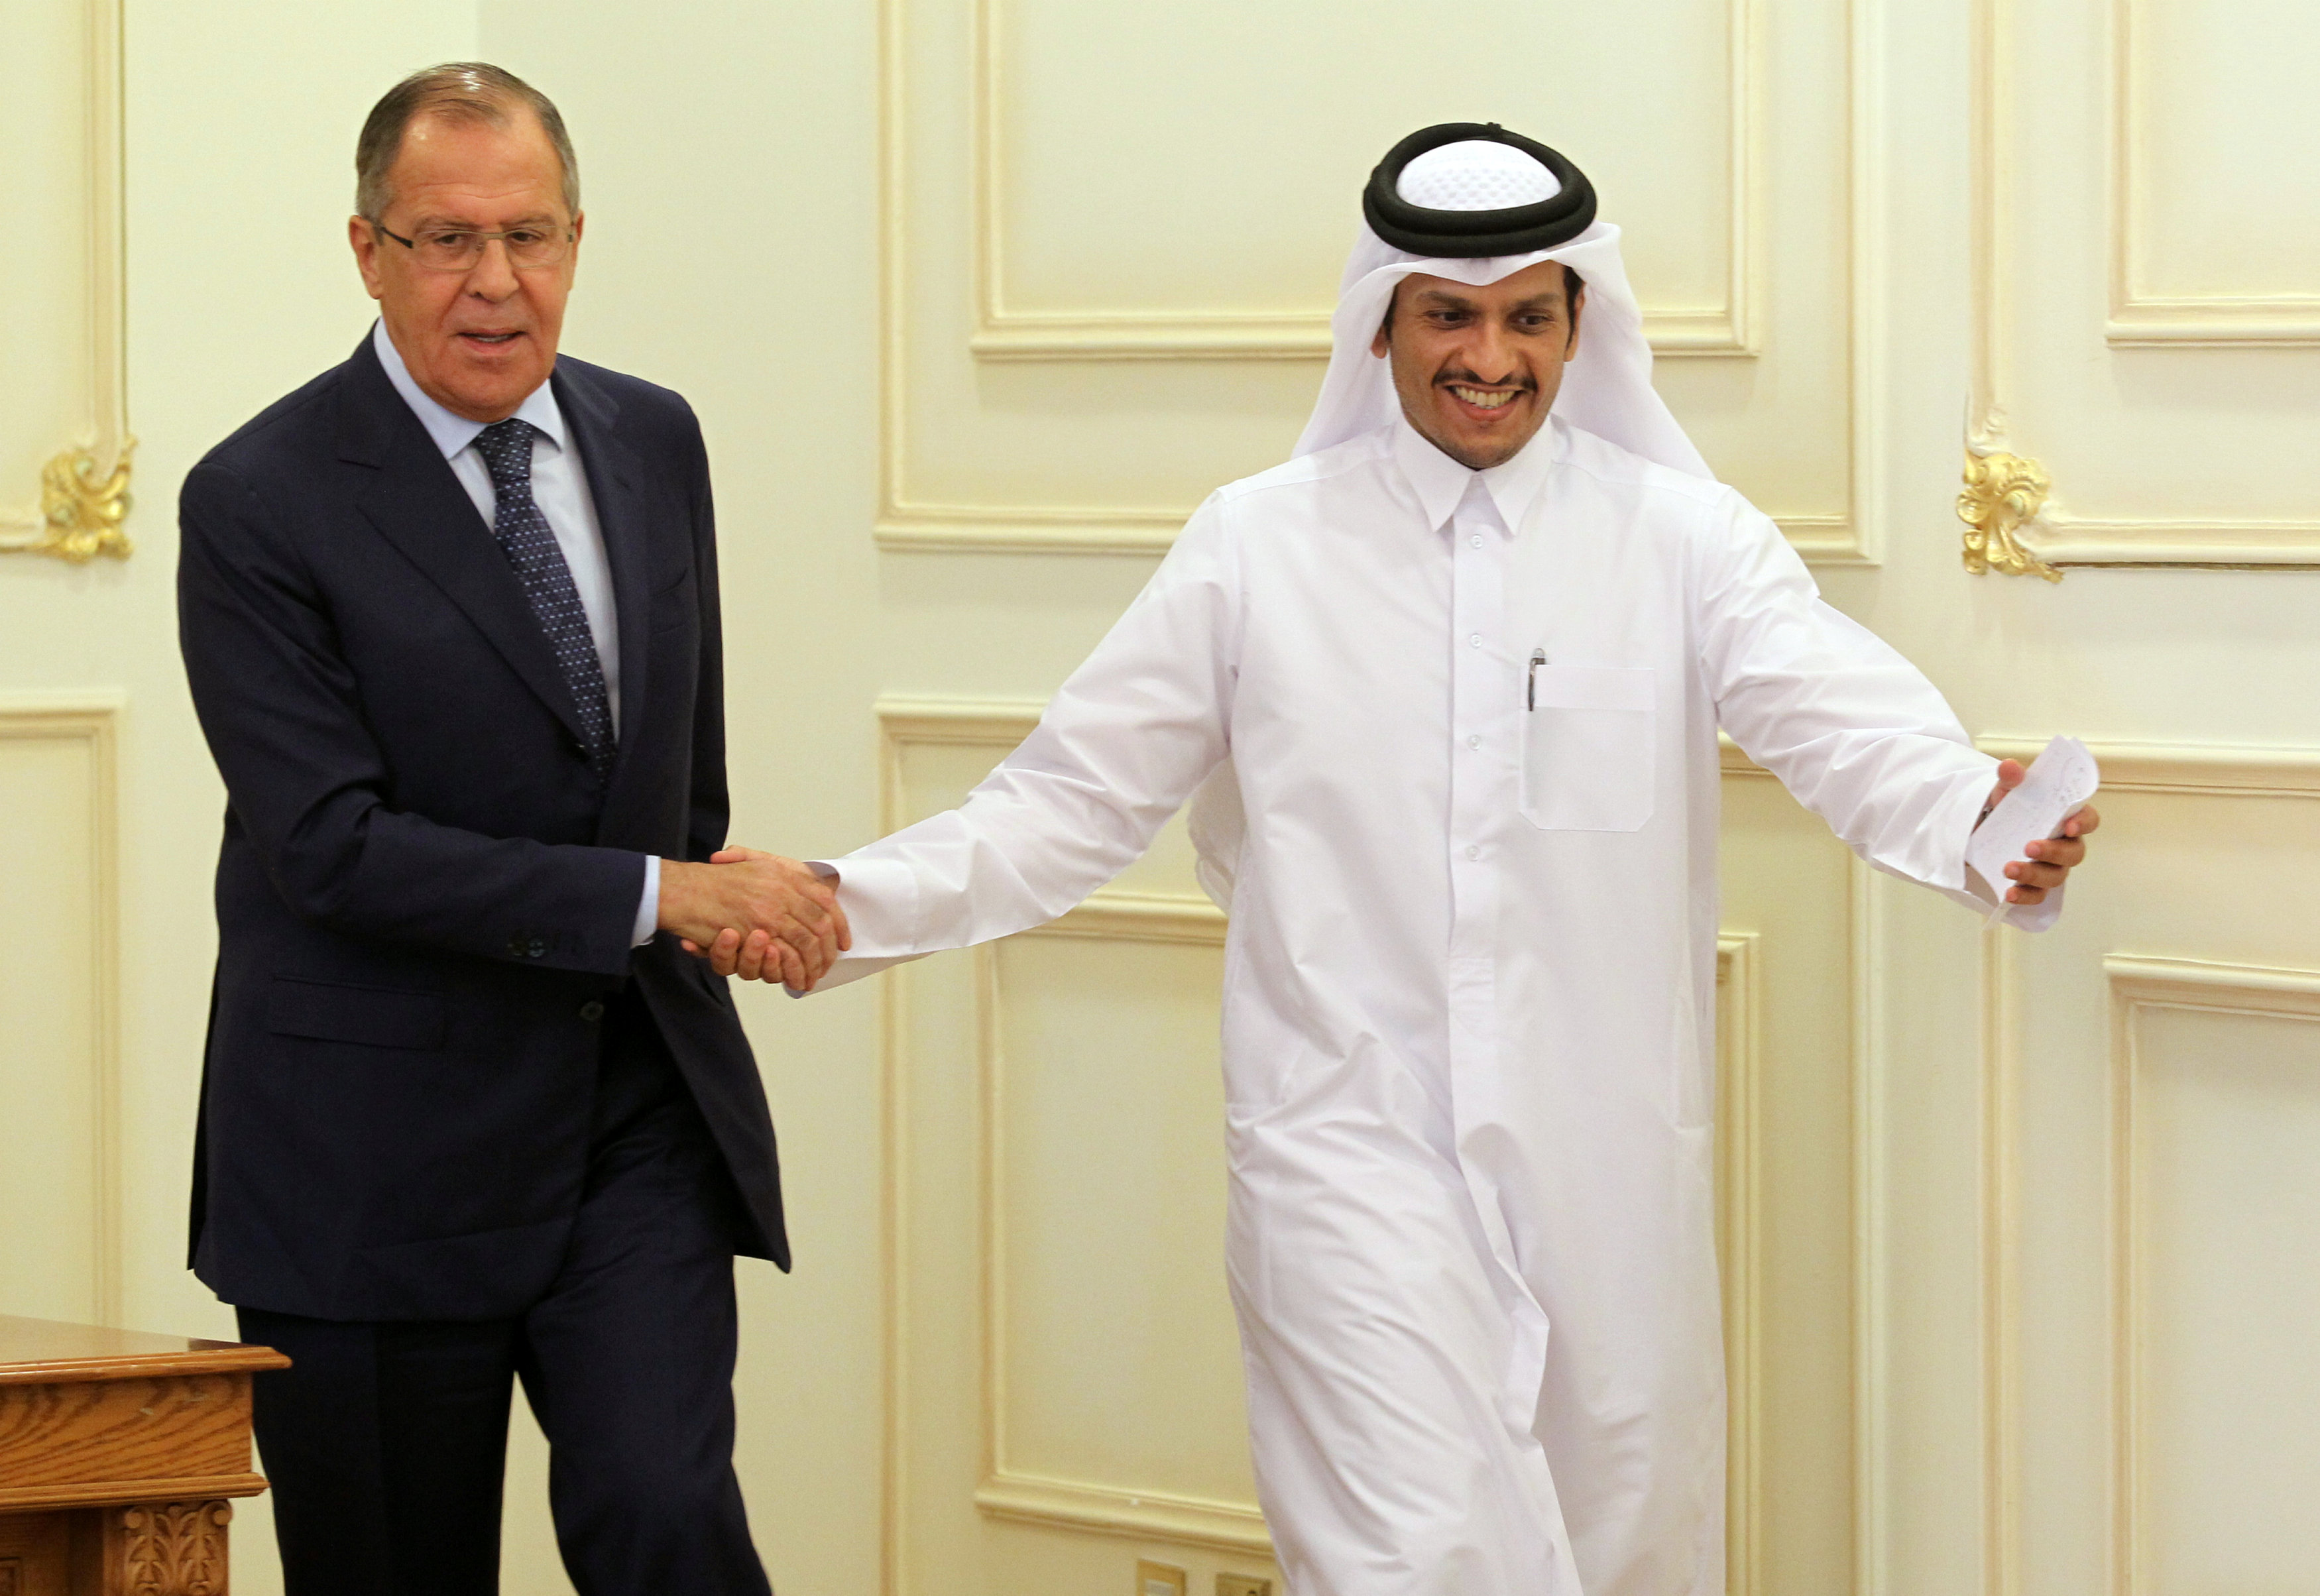 Qatar's foreign minister Sheikh Mohammed bin Abdulrahman al-Thani shakes hands with Russia's foreign minister Sergey Lavrov after a joint news conference in Doha